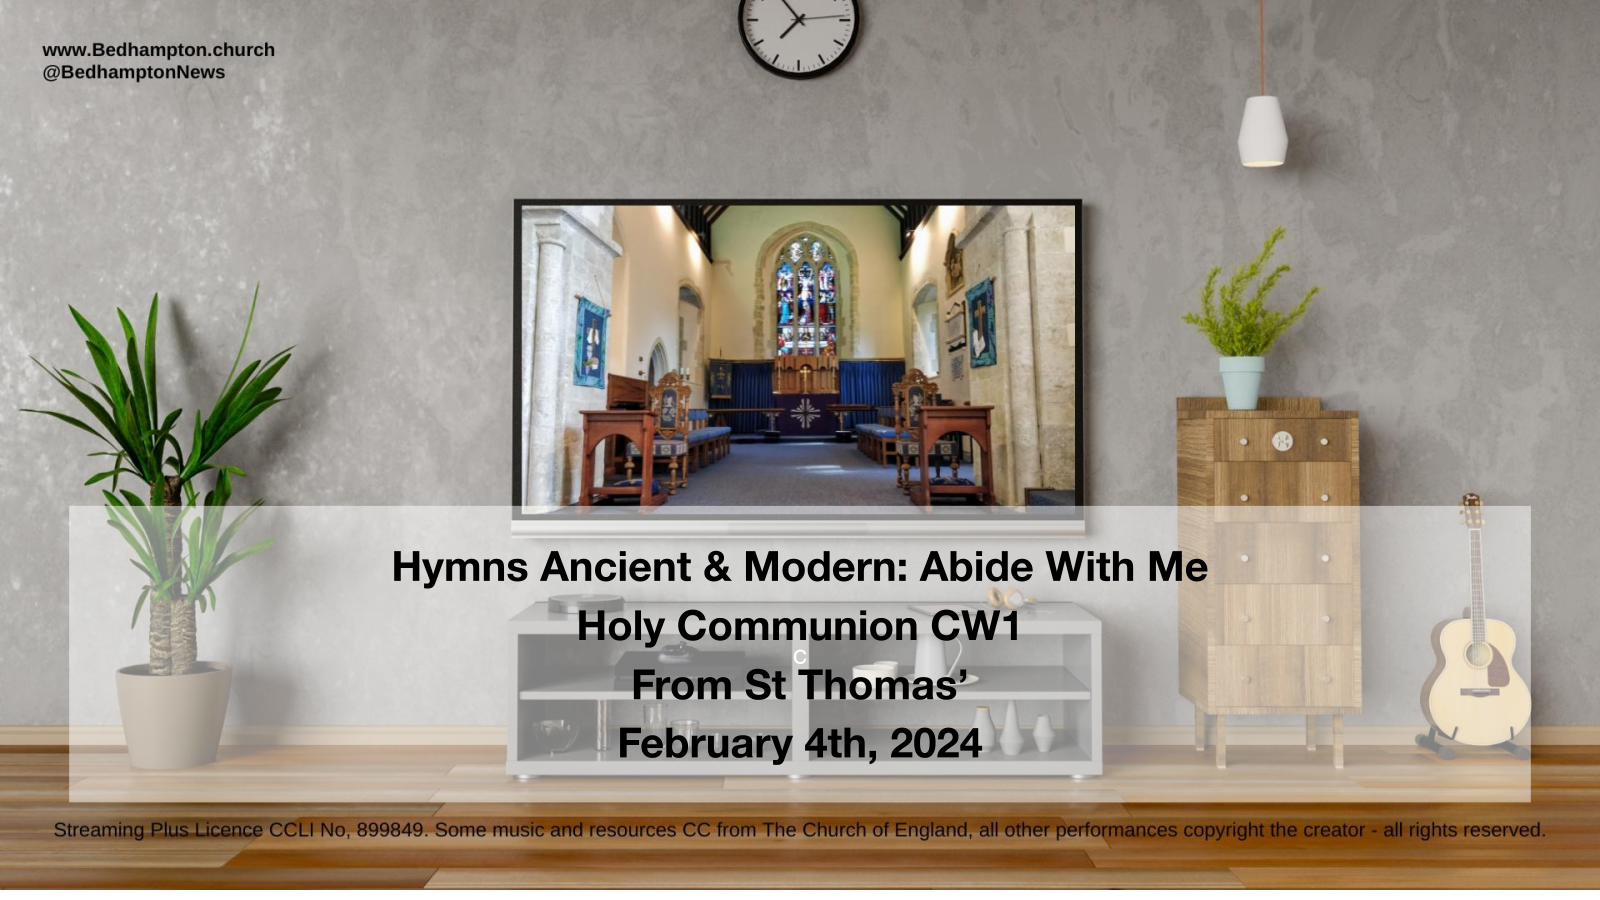 Holy Communion CW1 February 4th, 2024 – Hymns Ancient & Modern: Abide With Me